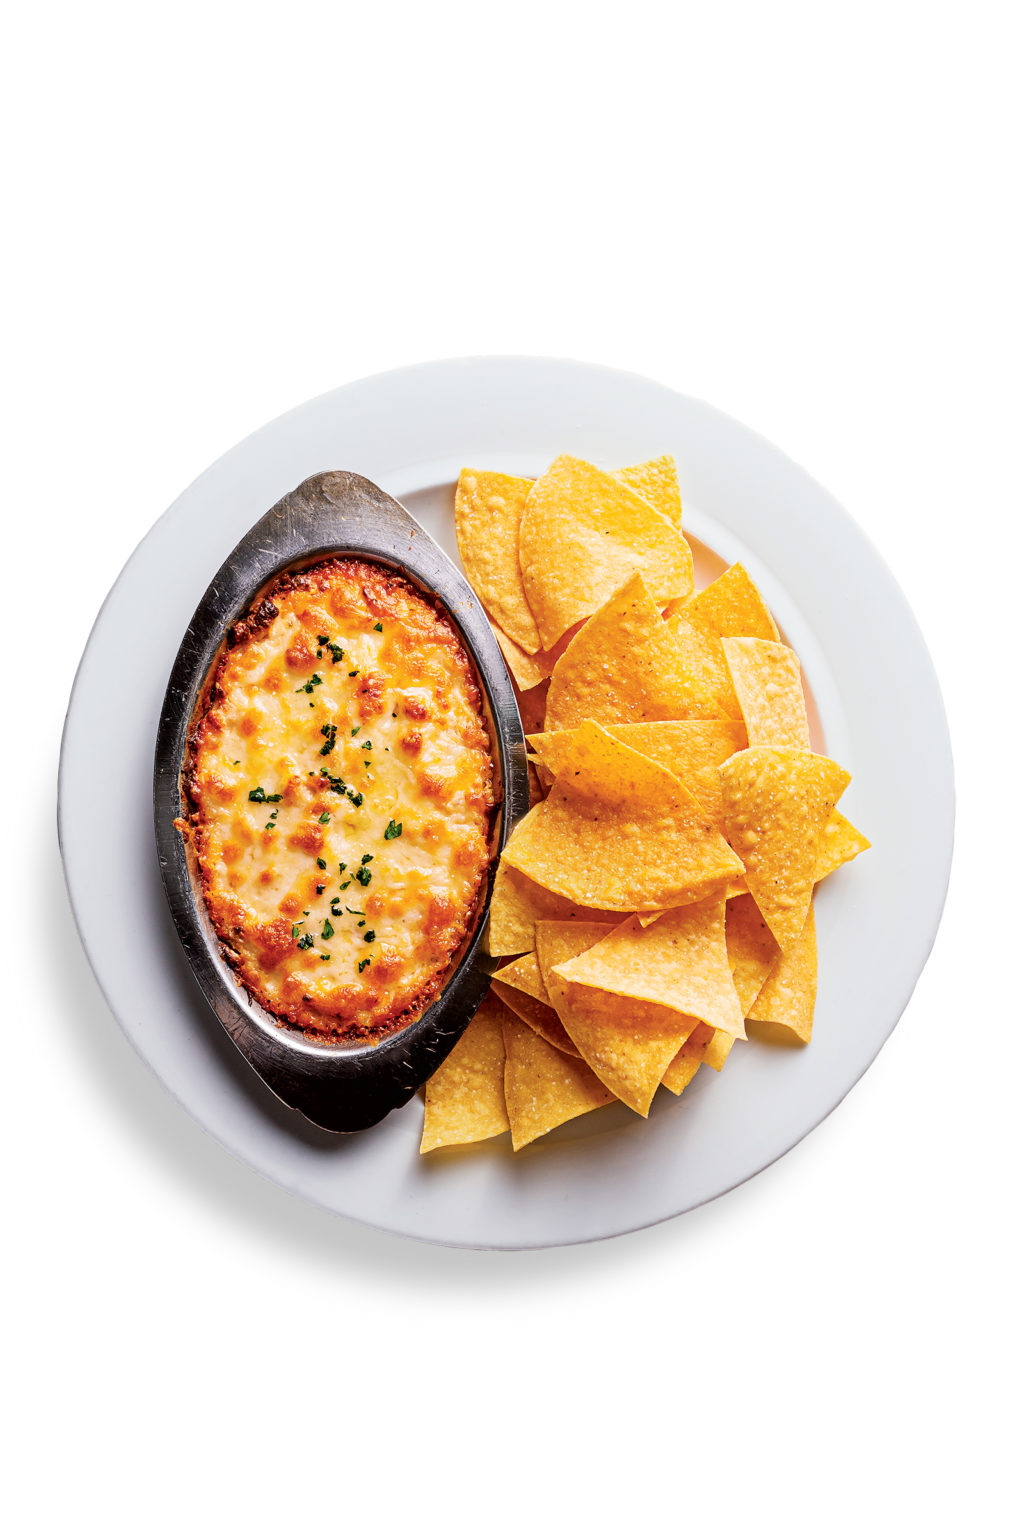 Recipe: How to Make Hank's Oyster Bar's Crab Dip ...